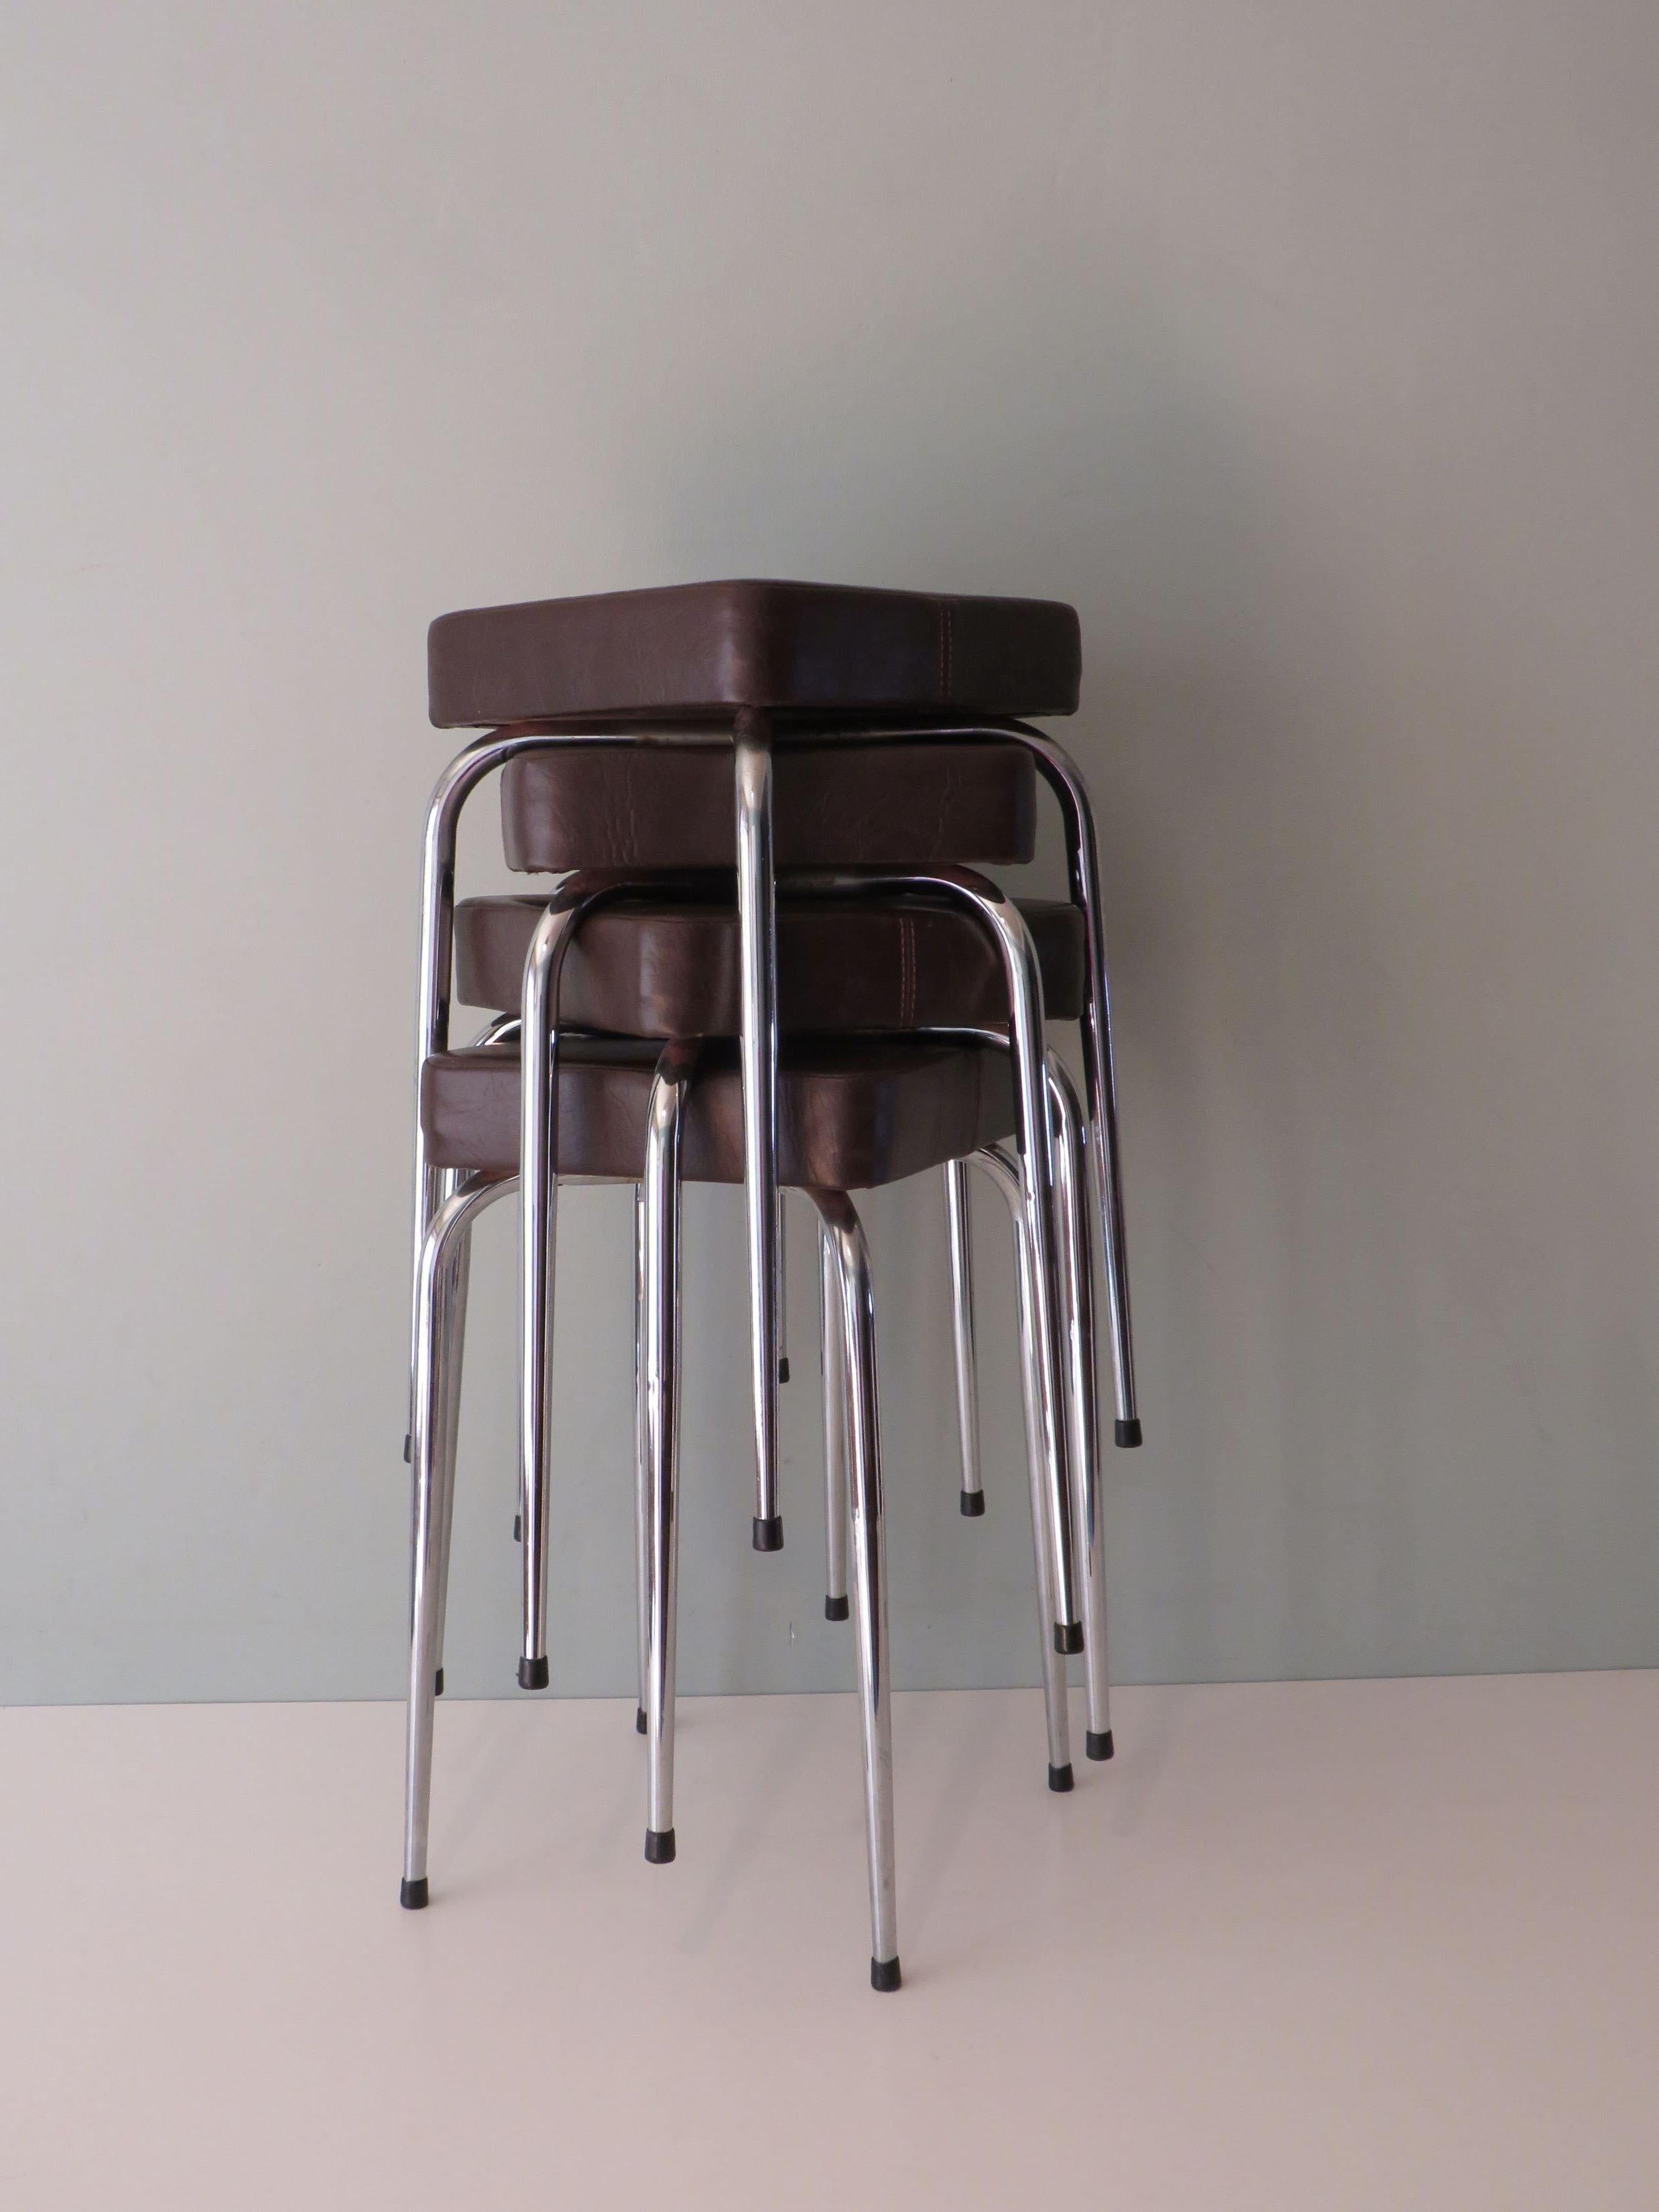 Set of 4 Stools, Chrome and Skai by Poelux, Belgium, 1960-1970 In Good Condition For Sale In Herentals, BE